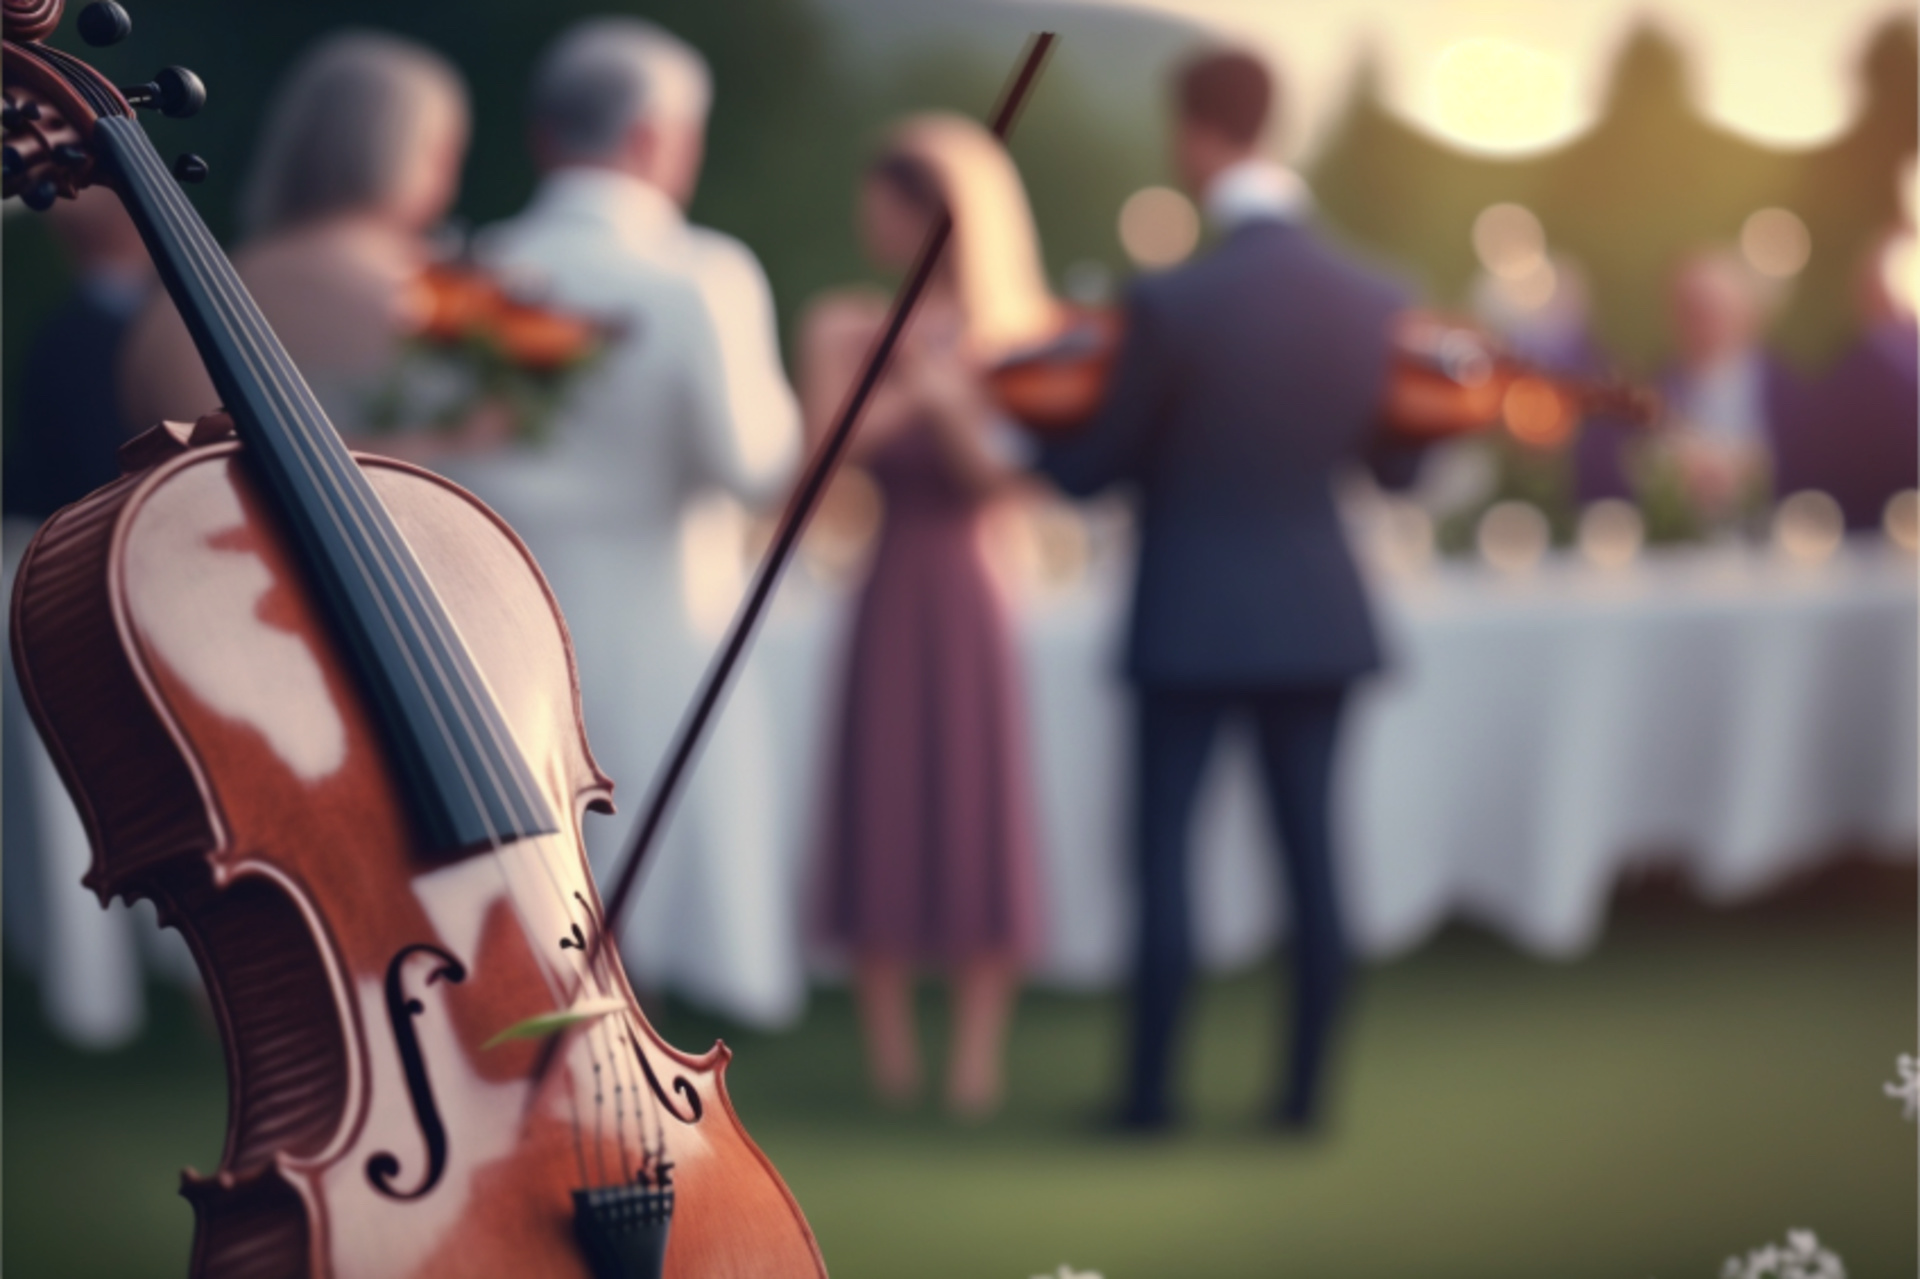 Marriage Like Orchestra - Adobe Stock